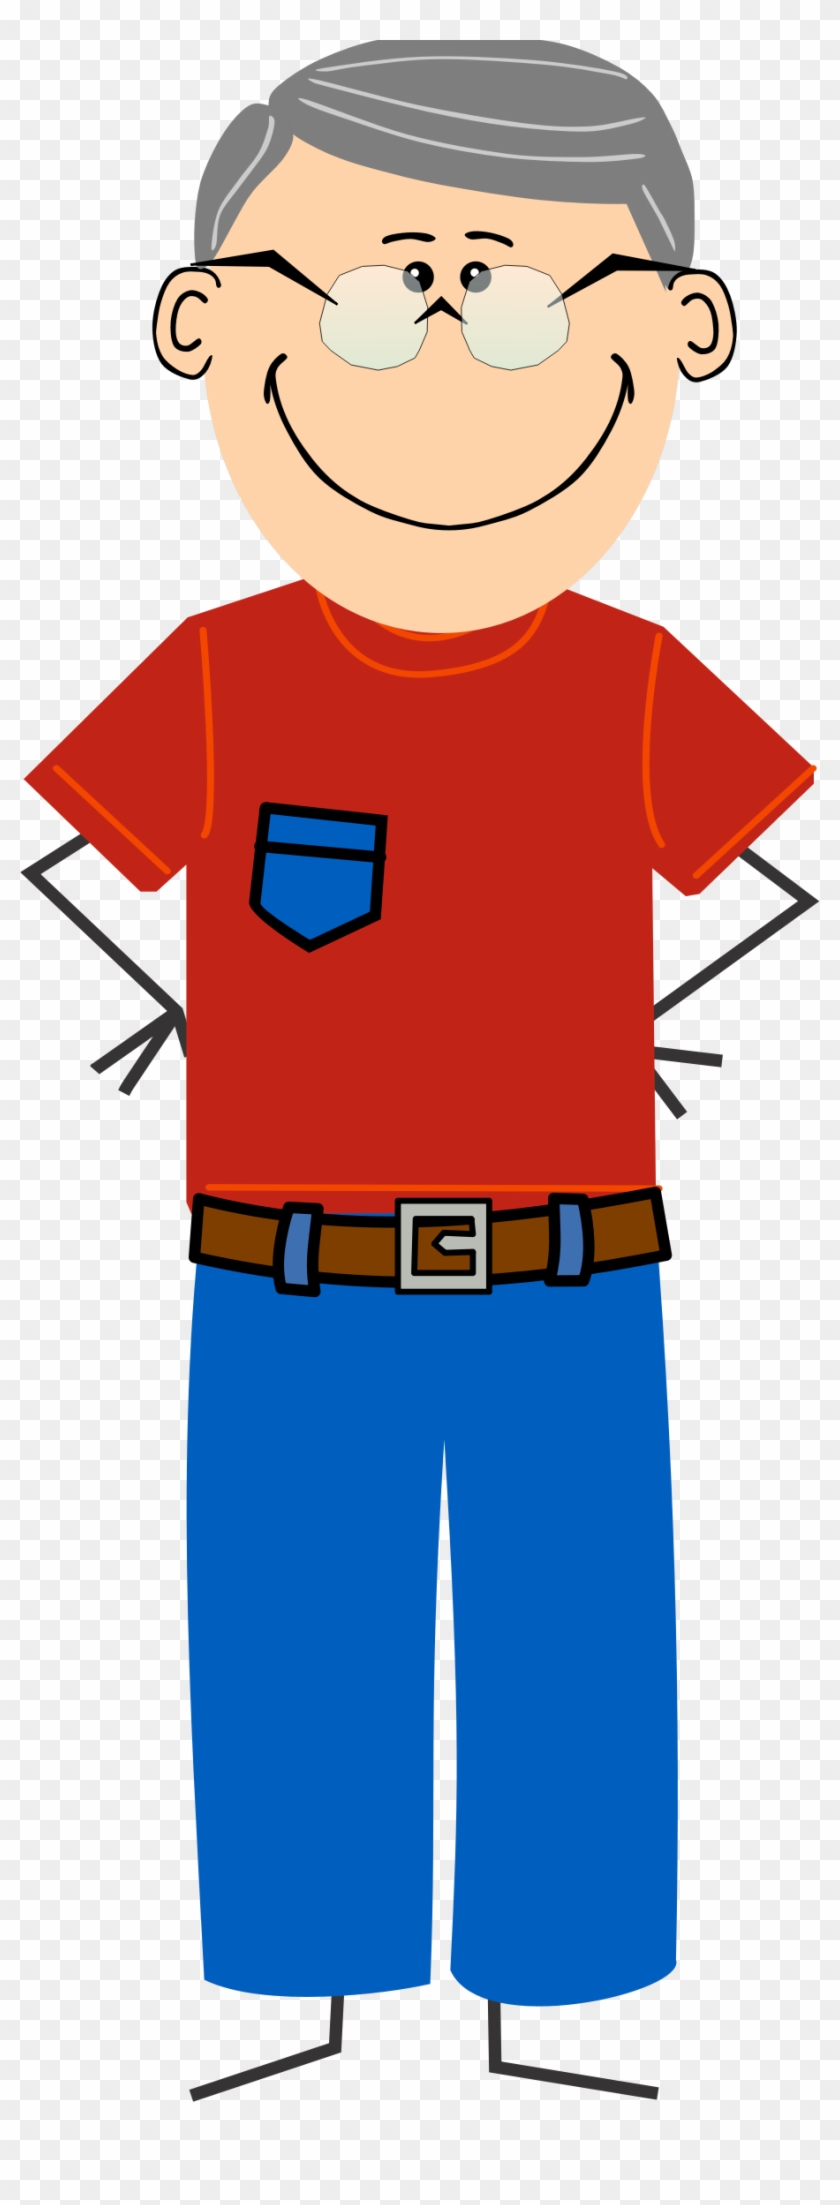 This Free Icons Png Design Of Grandpa With Jeans And Clipart